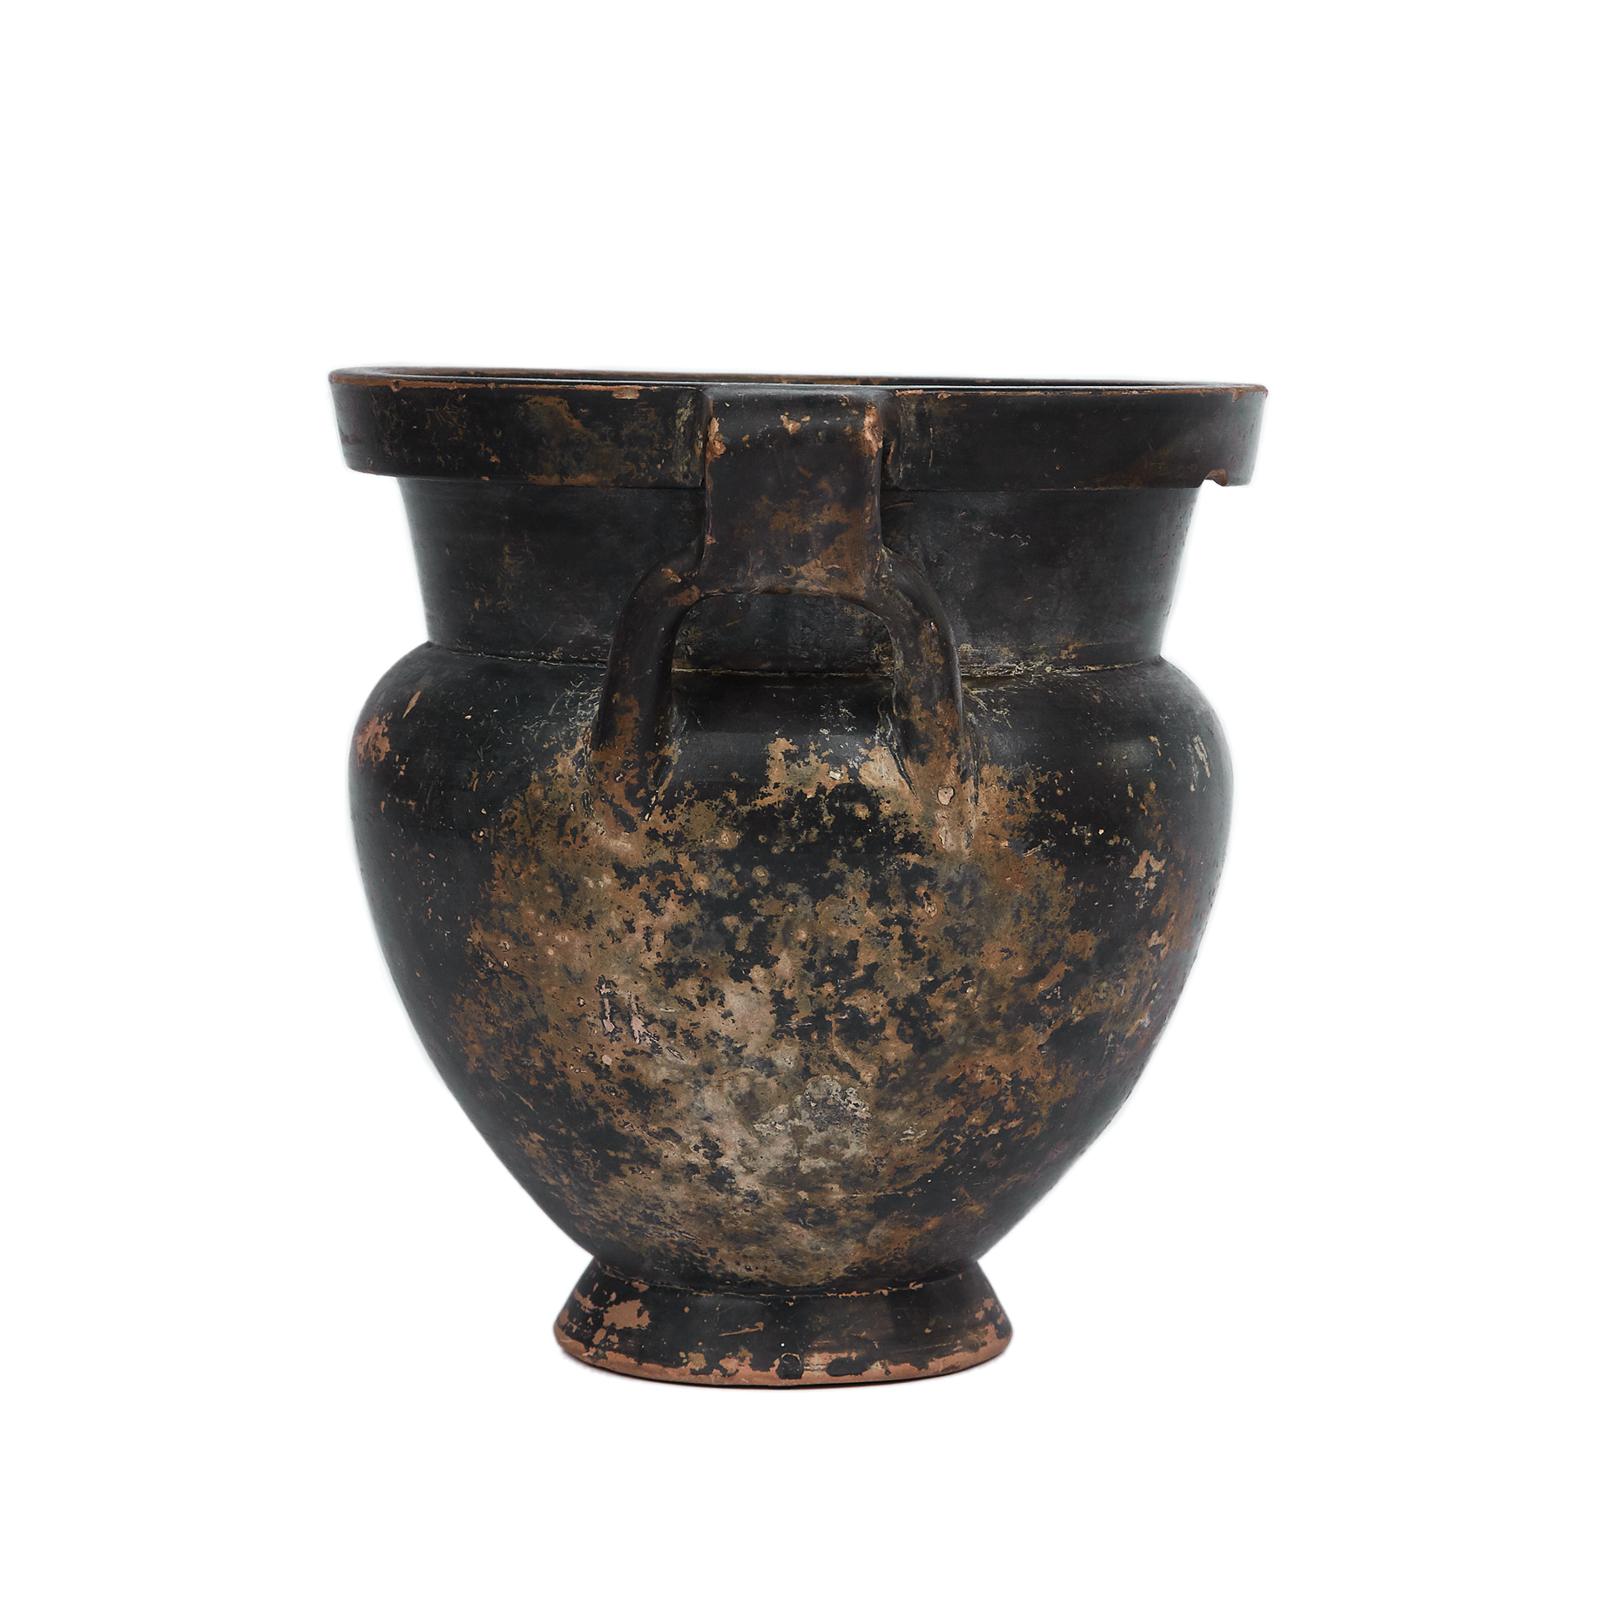 Black Glazen Column Krater
mid-4th century BC, Apulia

With broad avoid body on a short echinus foot and thick mouth.
The two handles form loops around the shoulders. 
Resembling the Laconian style this vase is extremely rare due to the integrity of